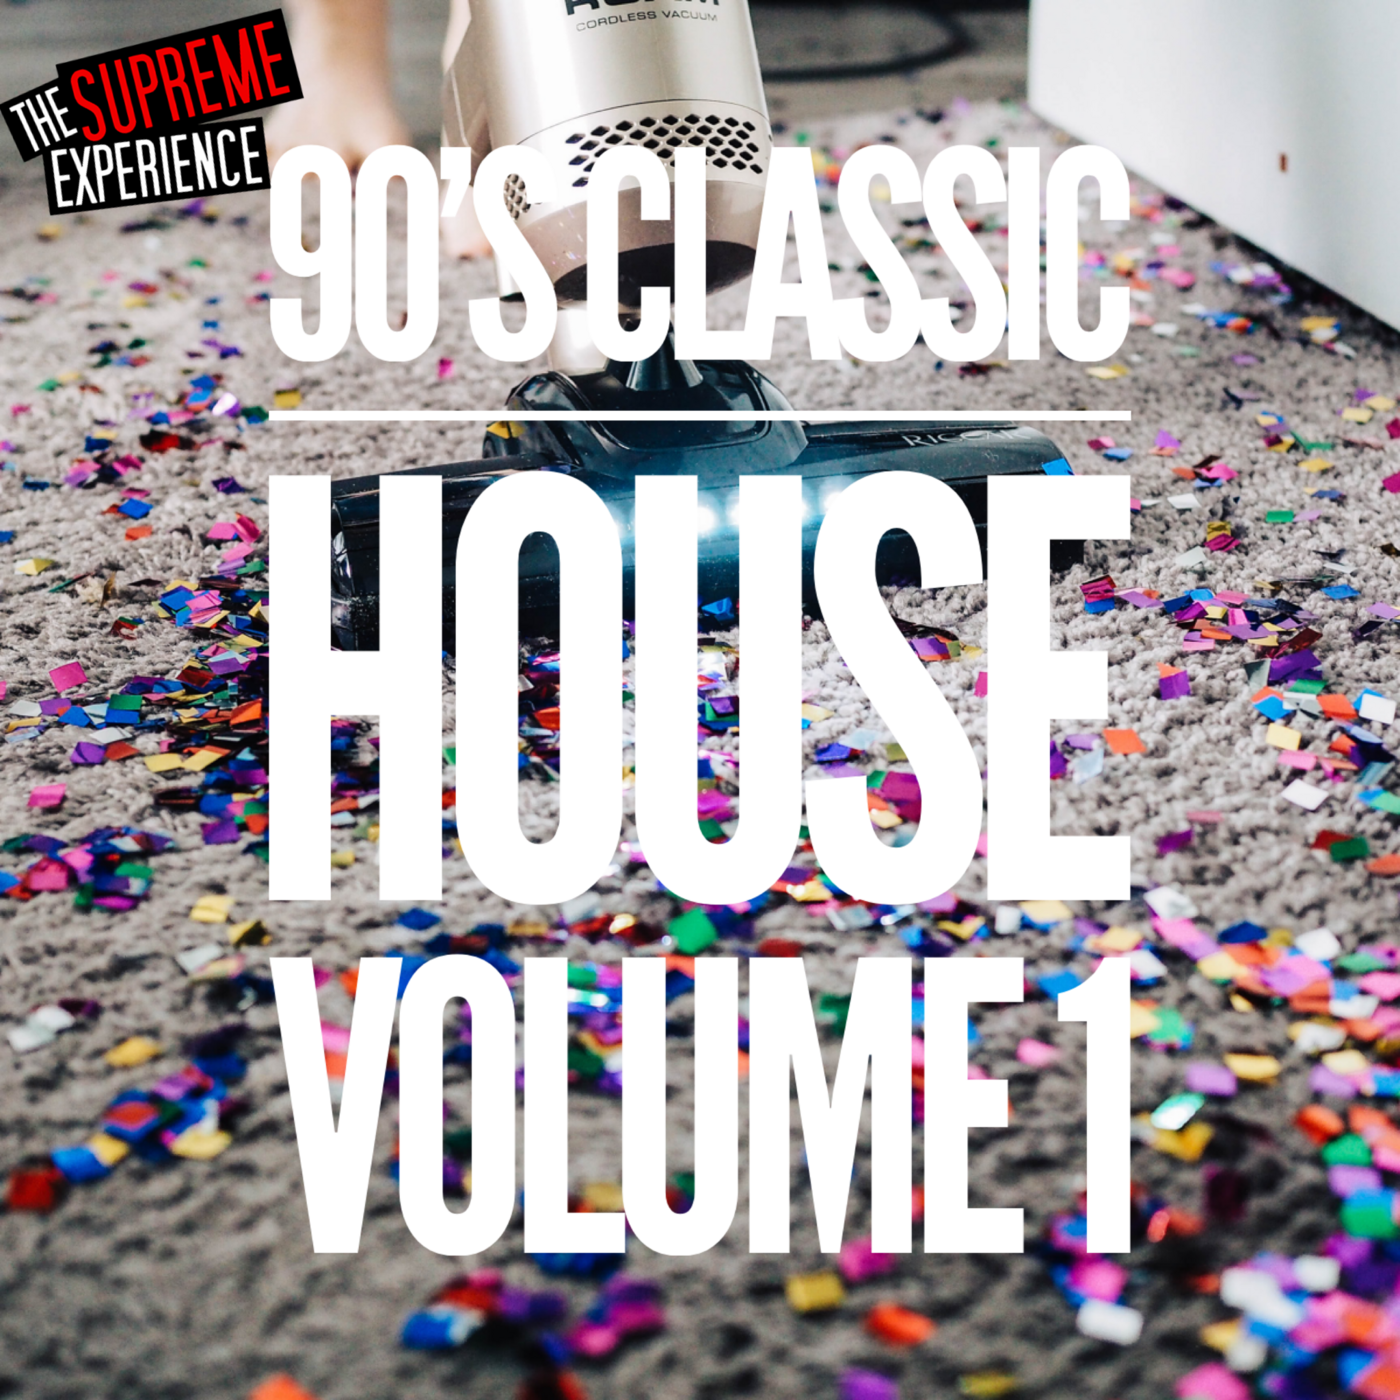 Episode 1: The Supreme Experience : Classic House Volume 1